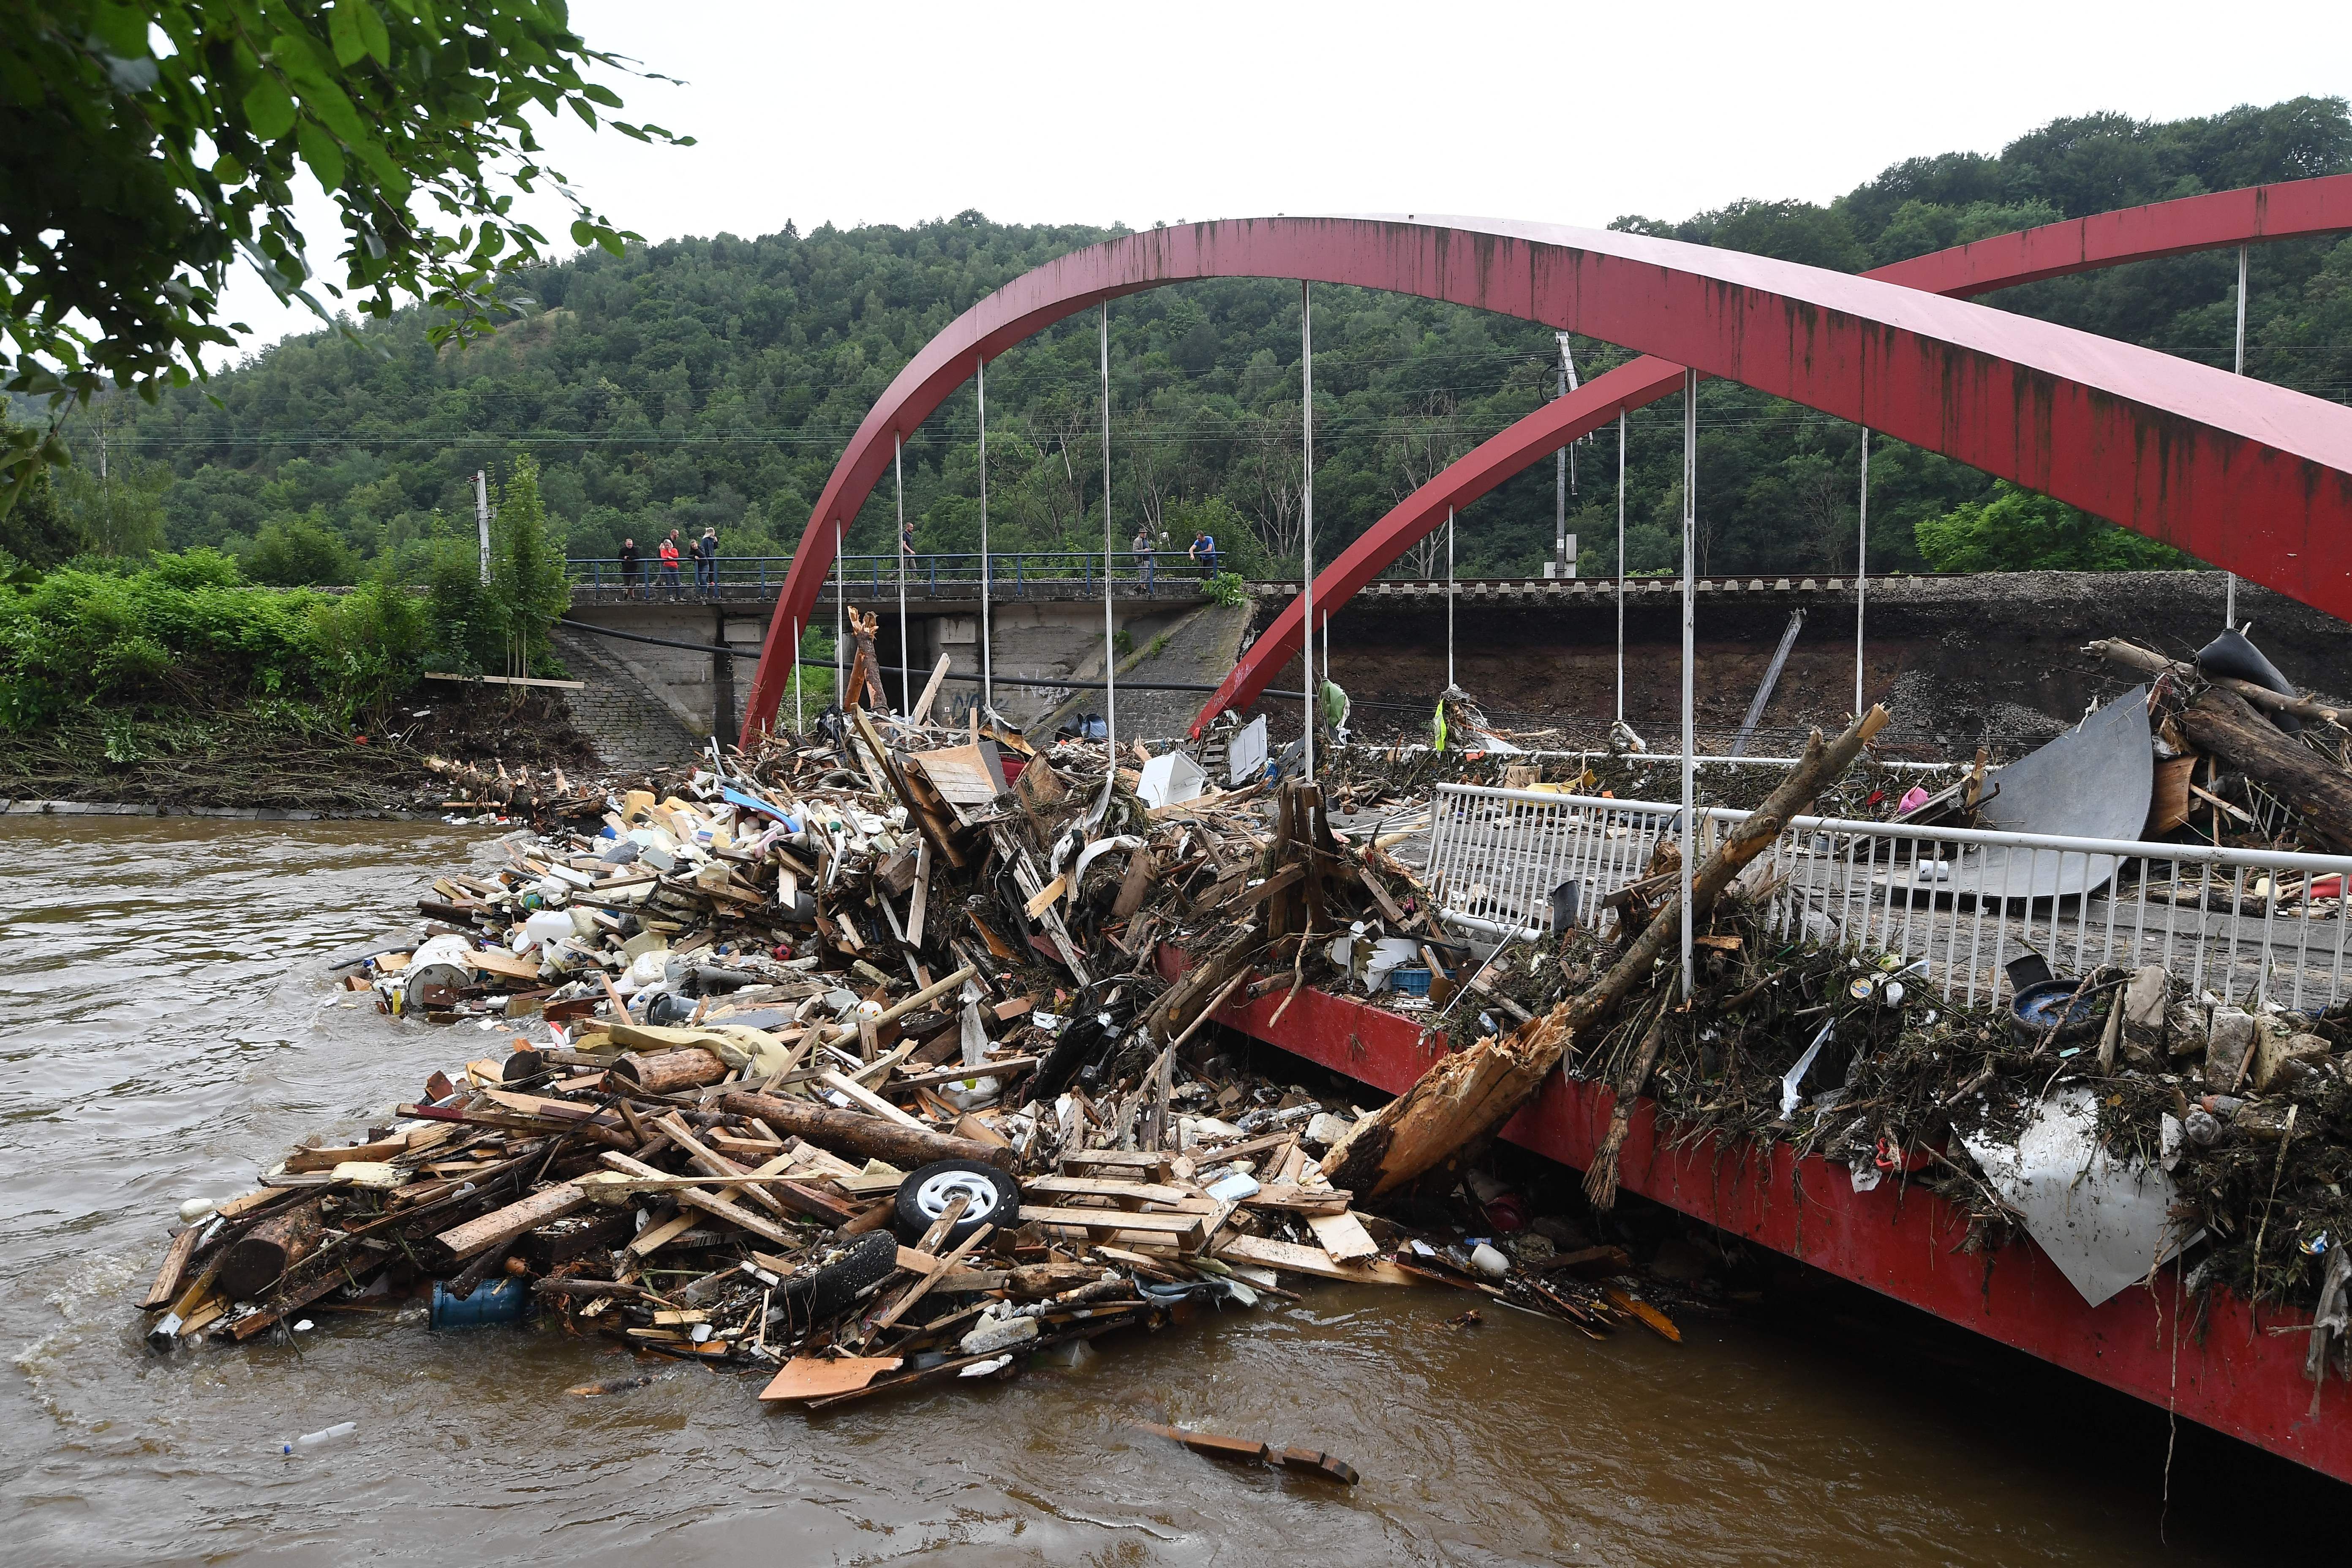 This picture taken in Chaudfontaine, near Liege, on July 16, 2021 shows debris piled up next to a bridge after the flood. 